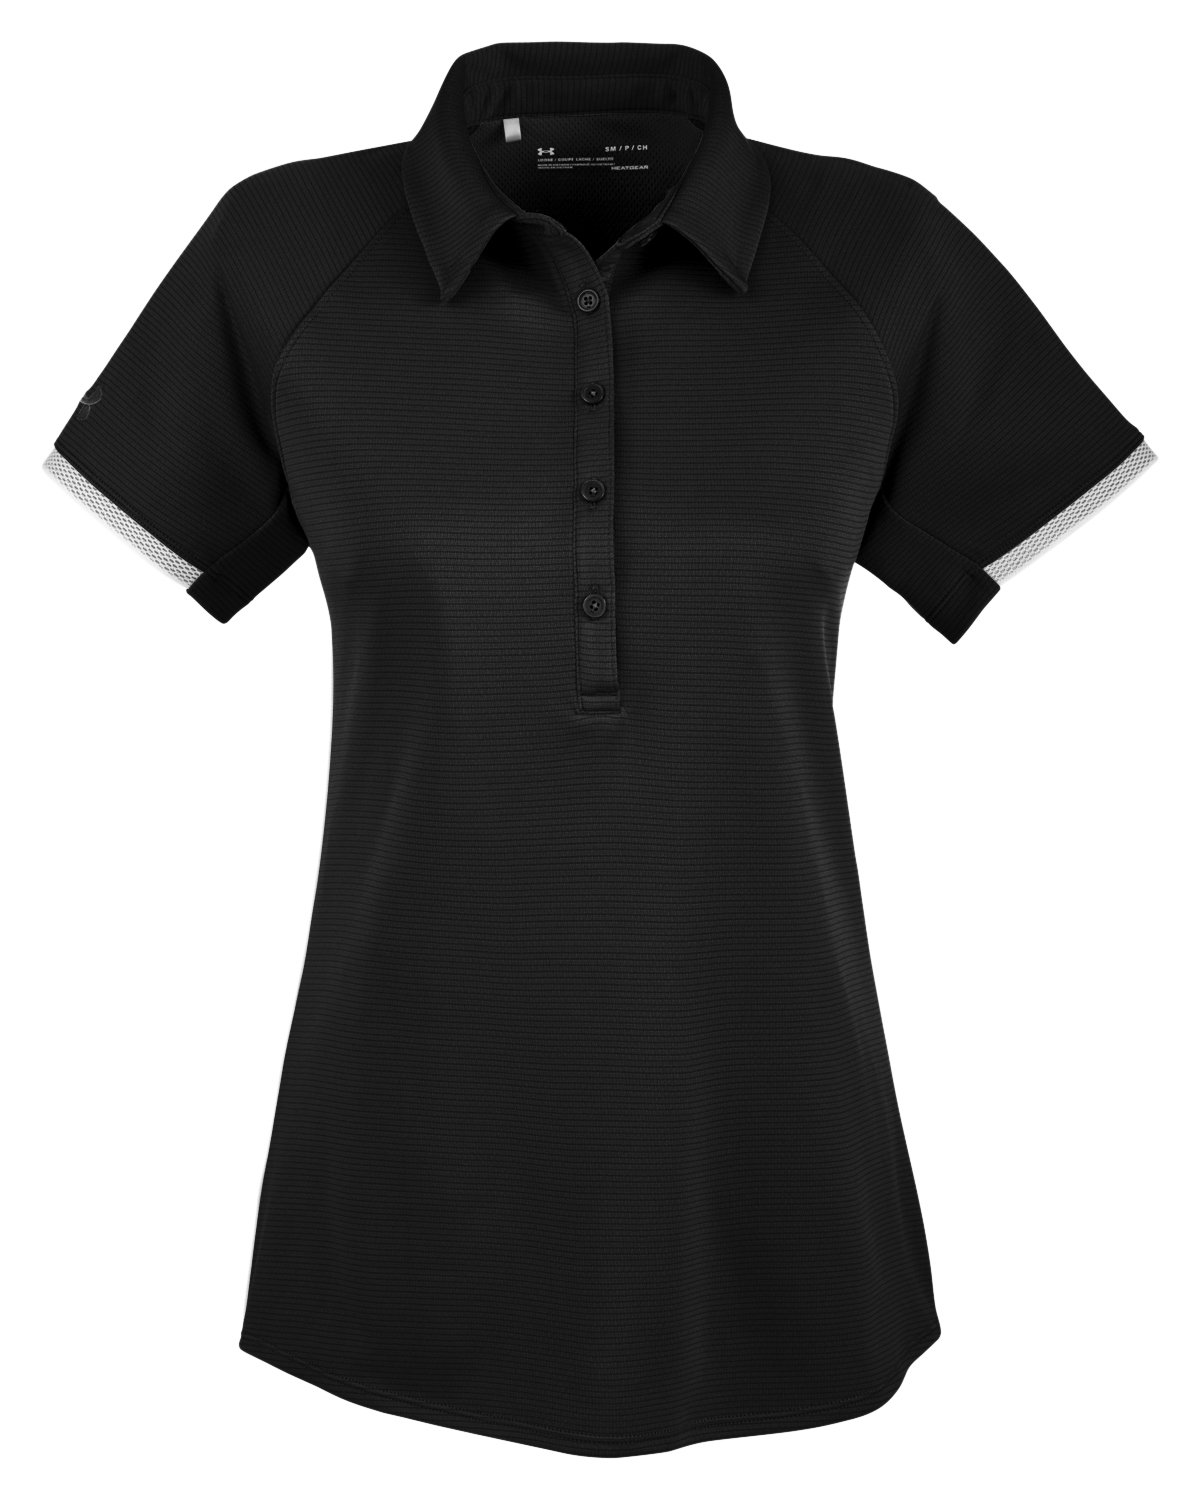 Under Armour 1343675 - Ladies' Corporate Rival Polo